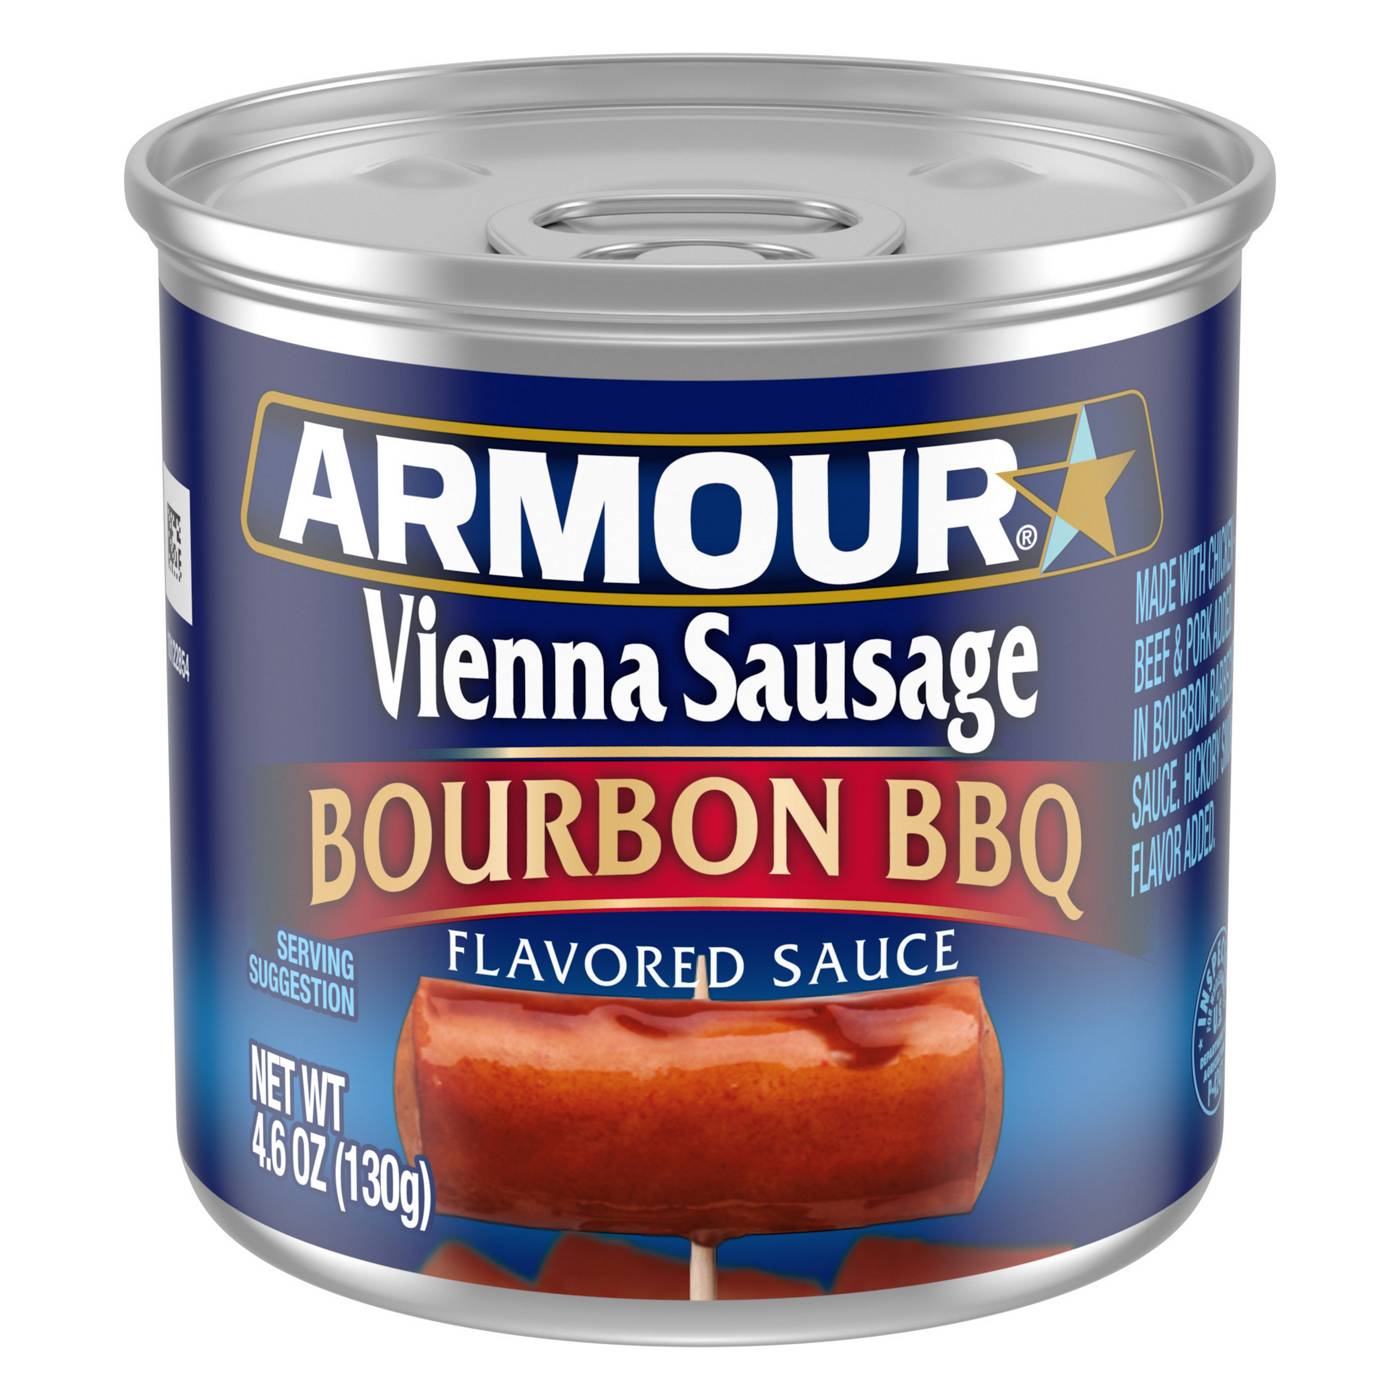 Armour Bourbon Barbecue Flavored Vienna Sausage Canned Sausage; image 1 of 4